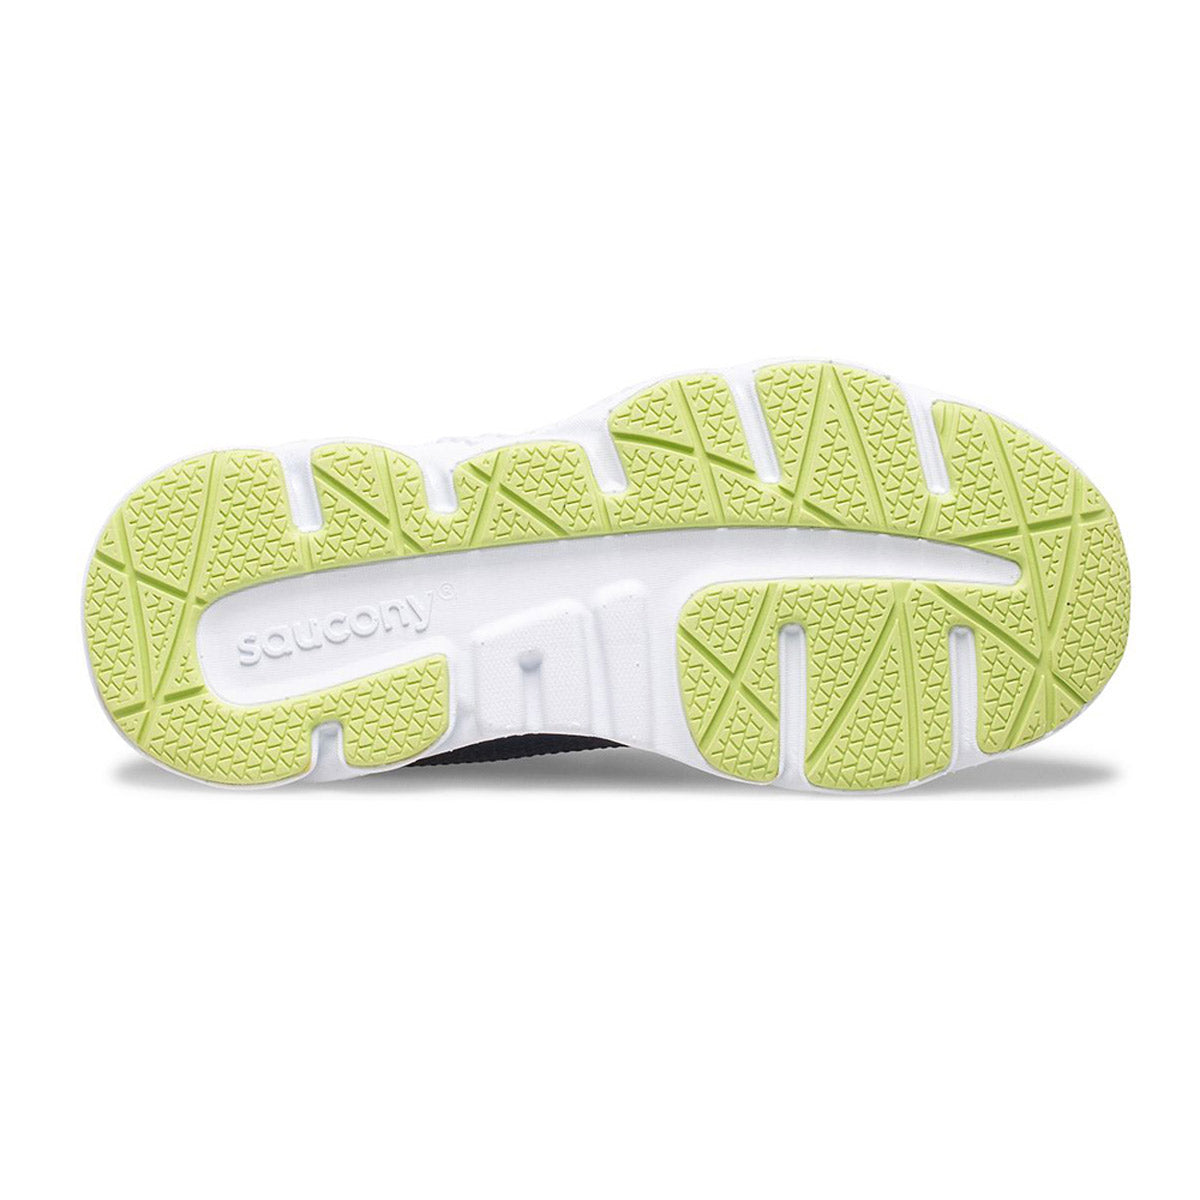 Sole of a Saucony Wind Shield running shoe with green tread designs and brand logo, featuring a water-repellent upper.